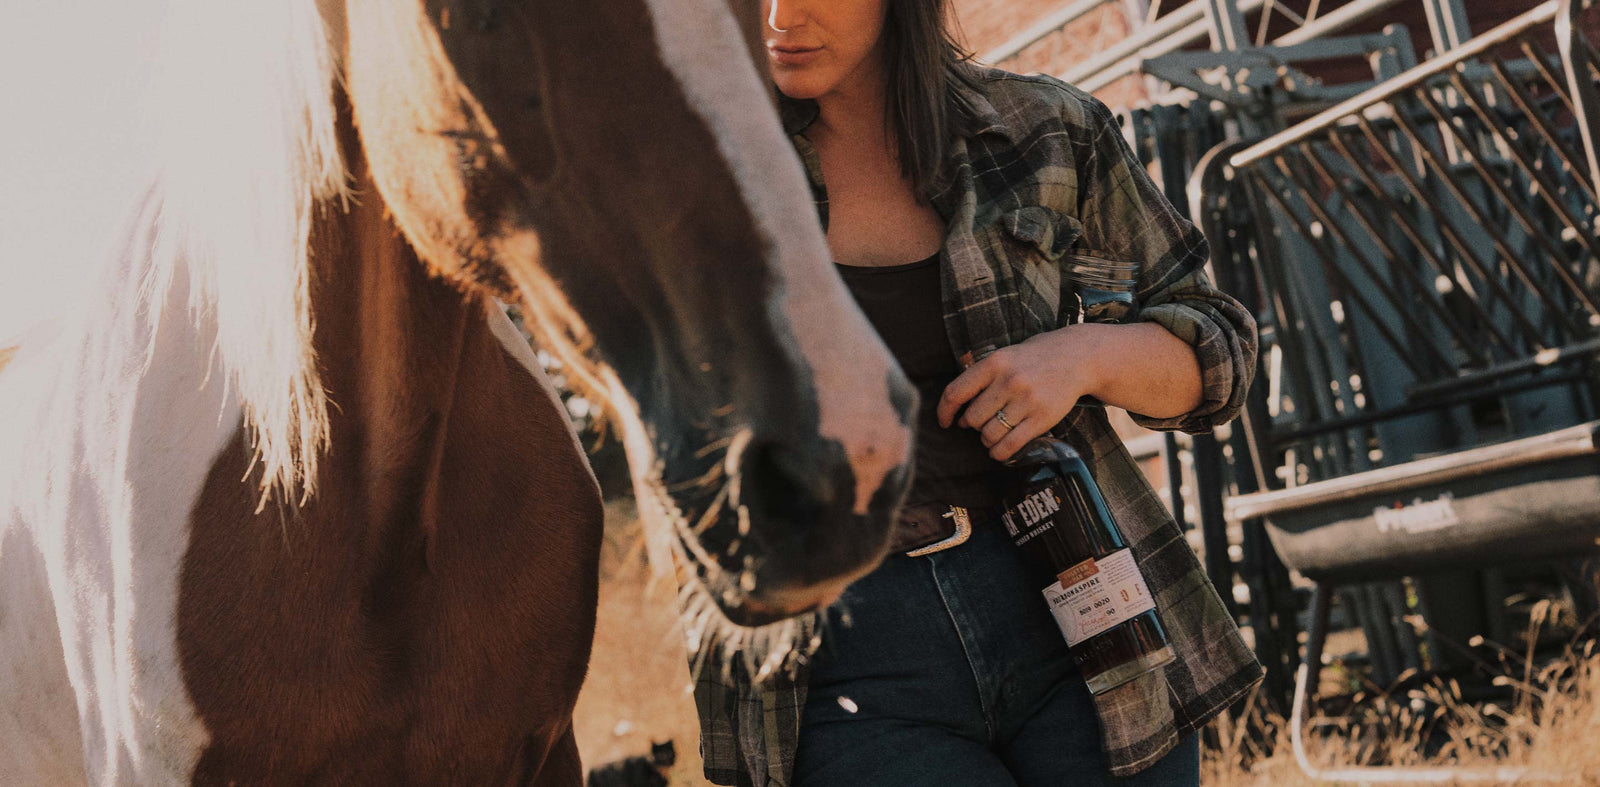 A women standing next to a brown and white haired horse. She is gesturing toward the horse as if she is speaking to it. She is touching the horse with one hand and holding a bottle of Oak & Eden Whiskey in the other hand.